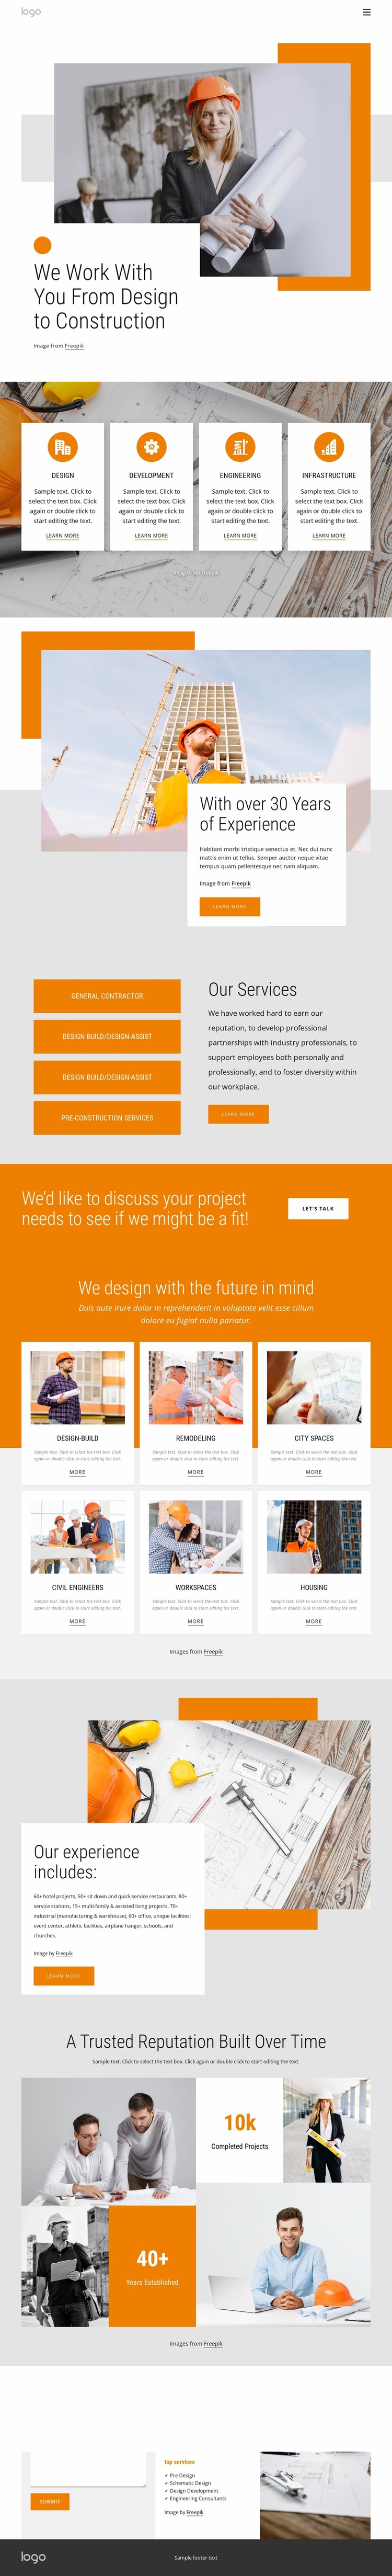 From design to construction Website Builder Templates